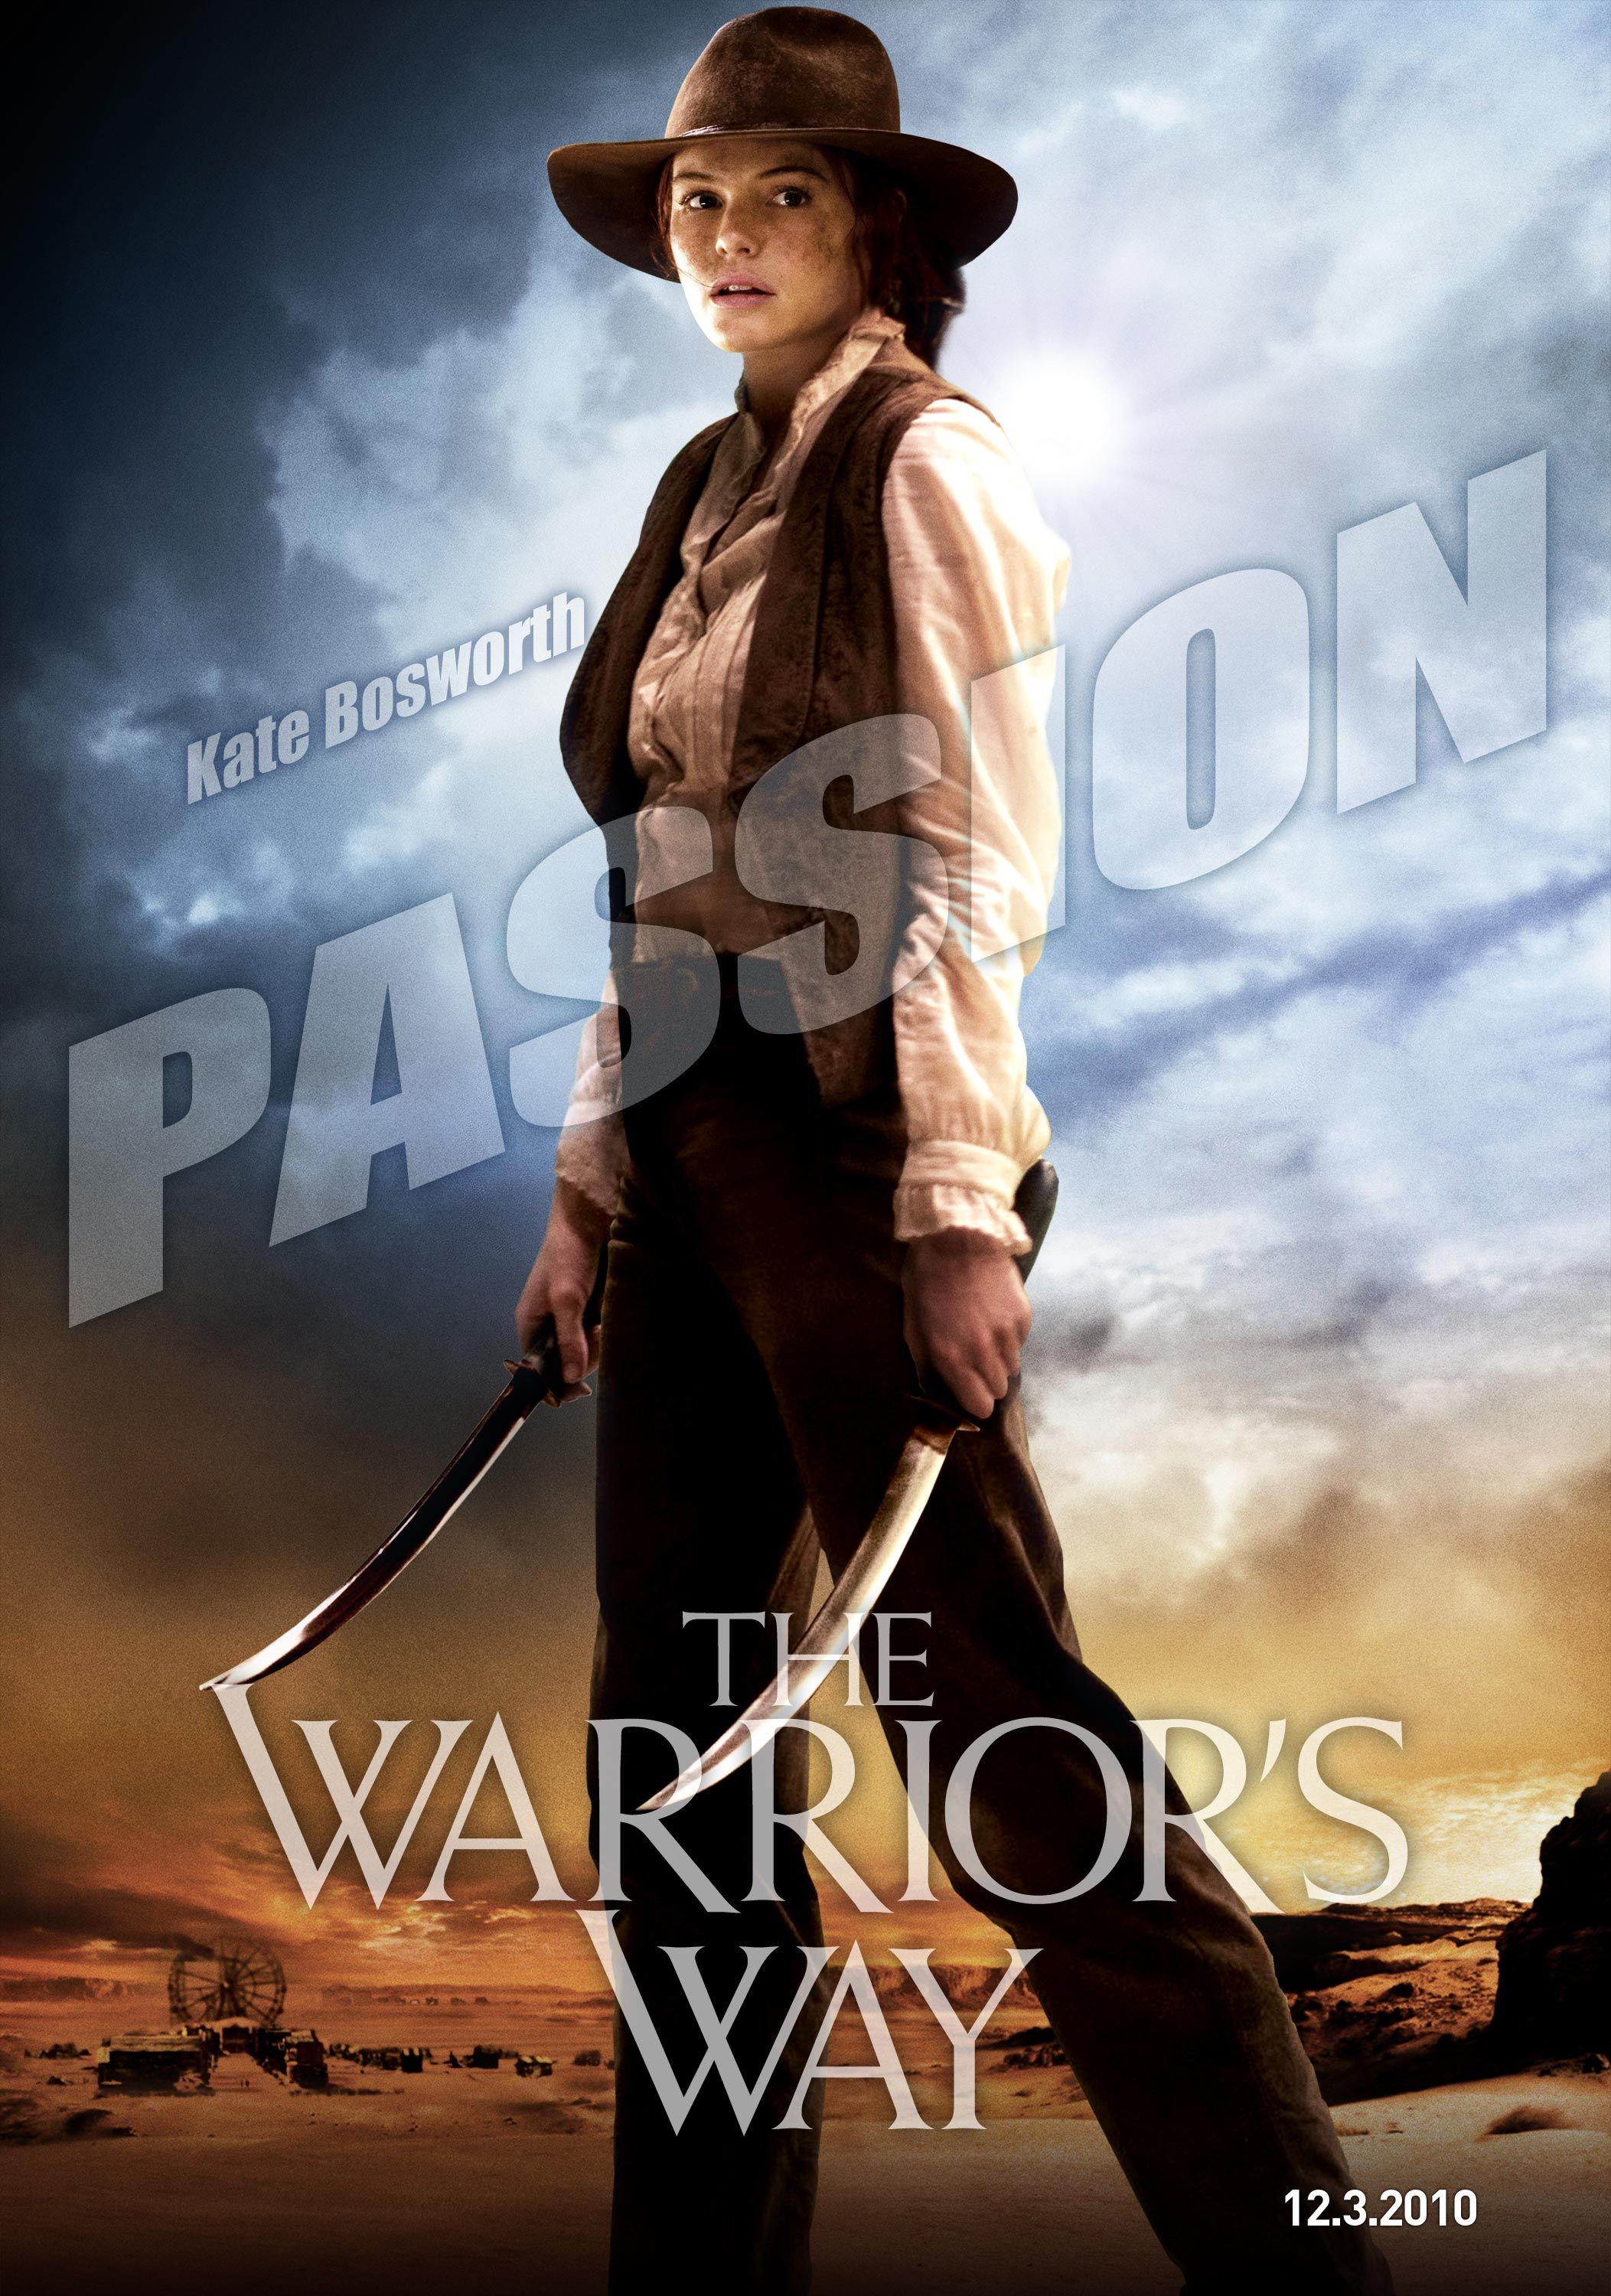 The Warrior's Way Kate Bosworth Poster